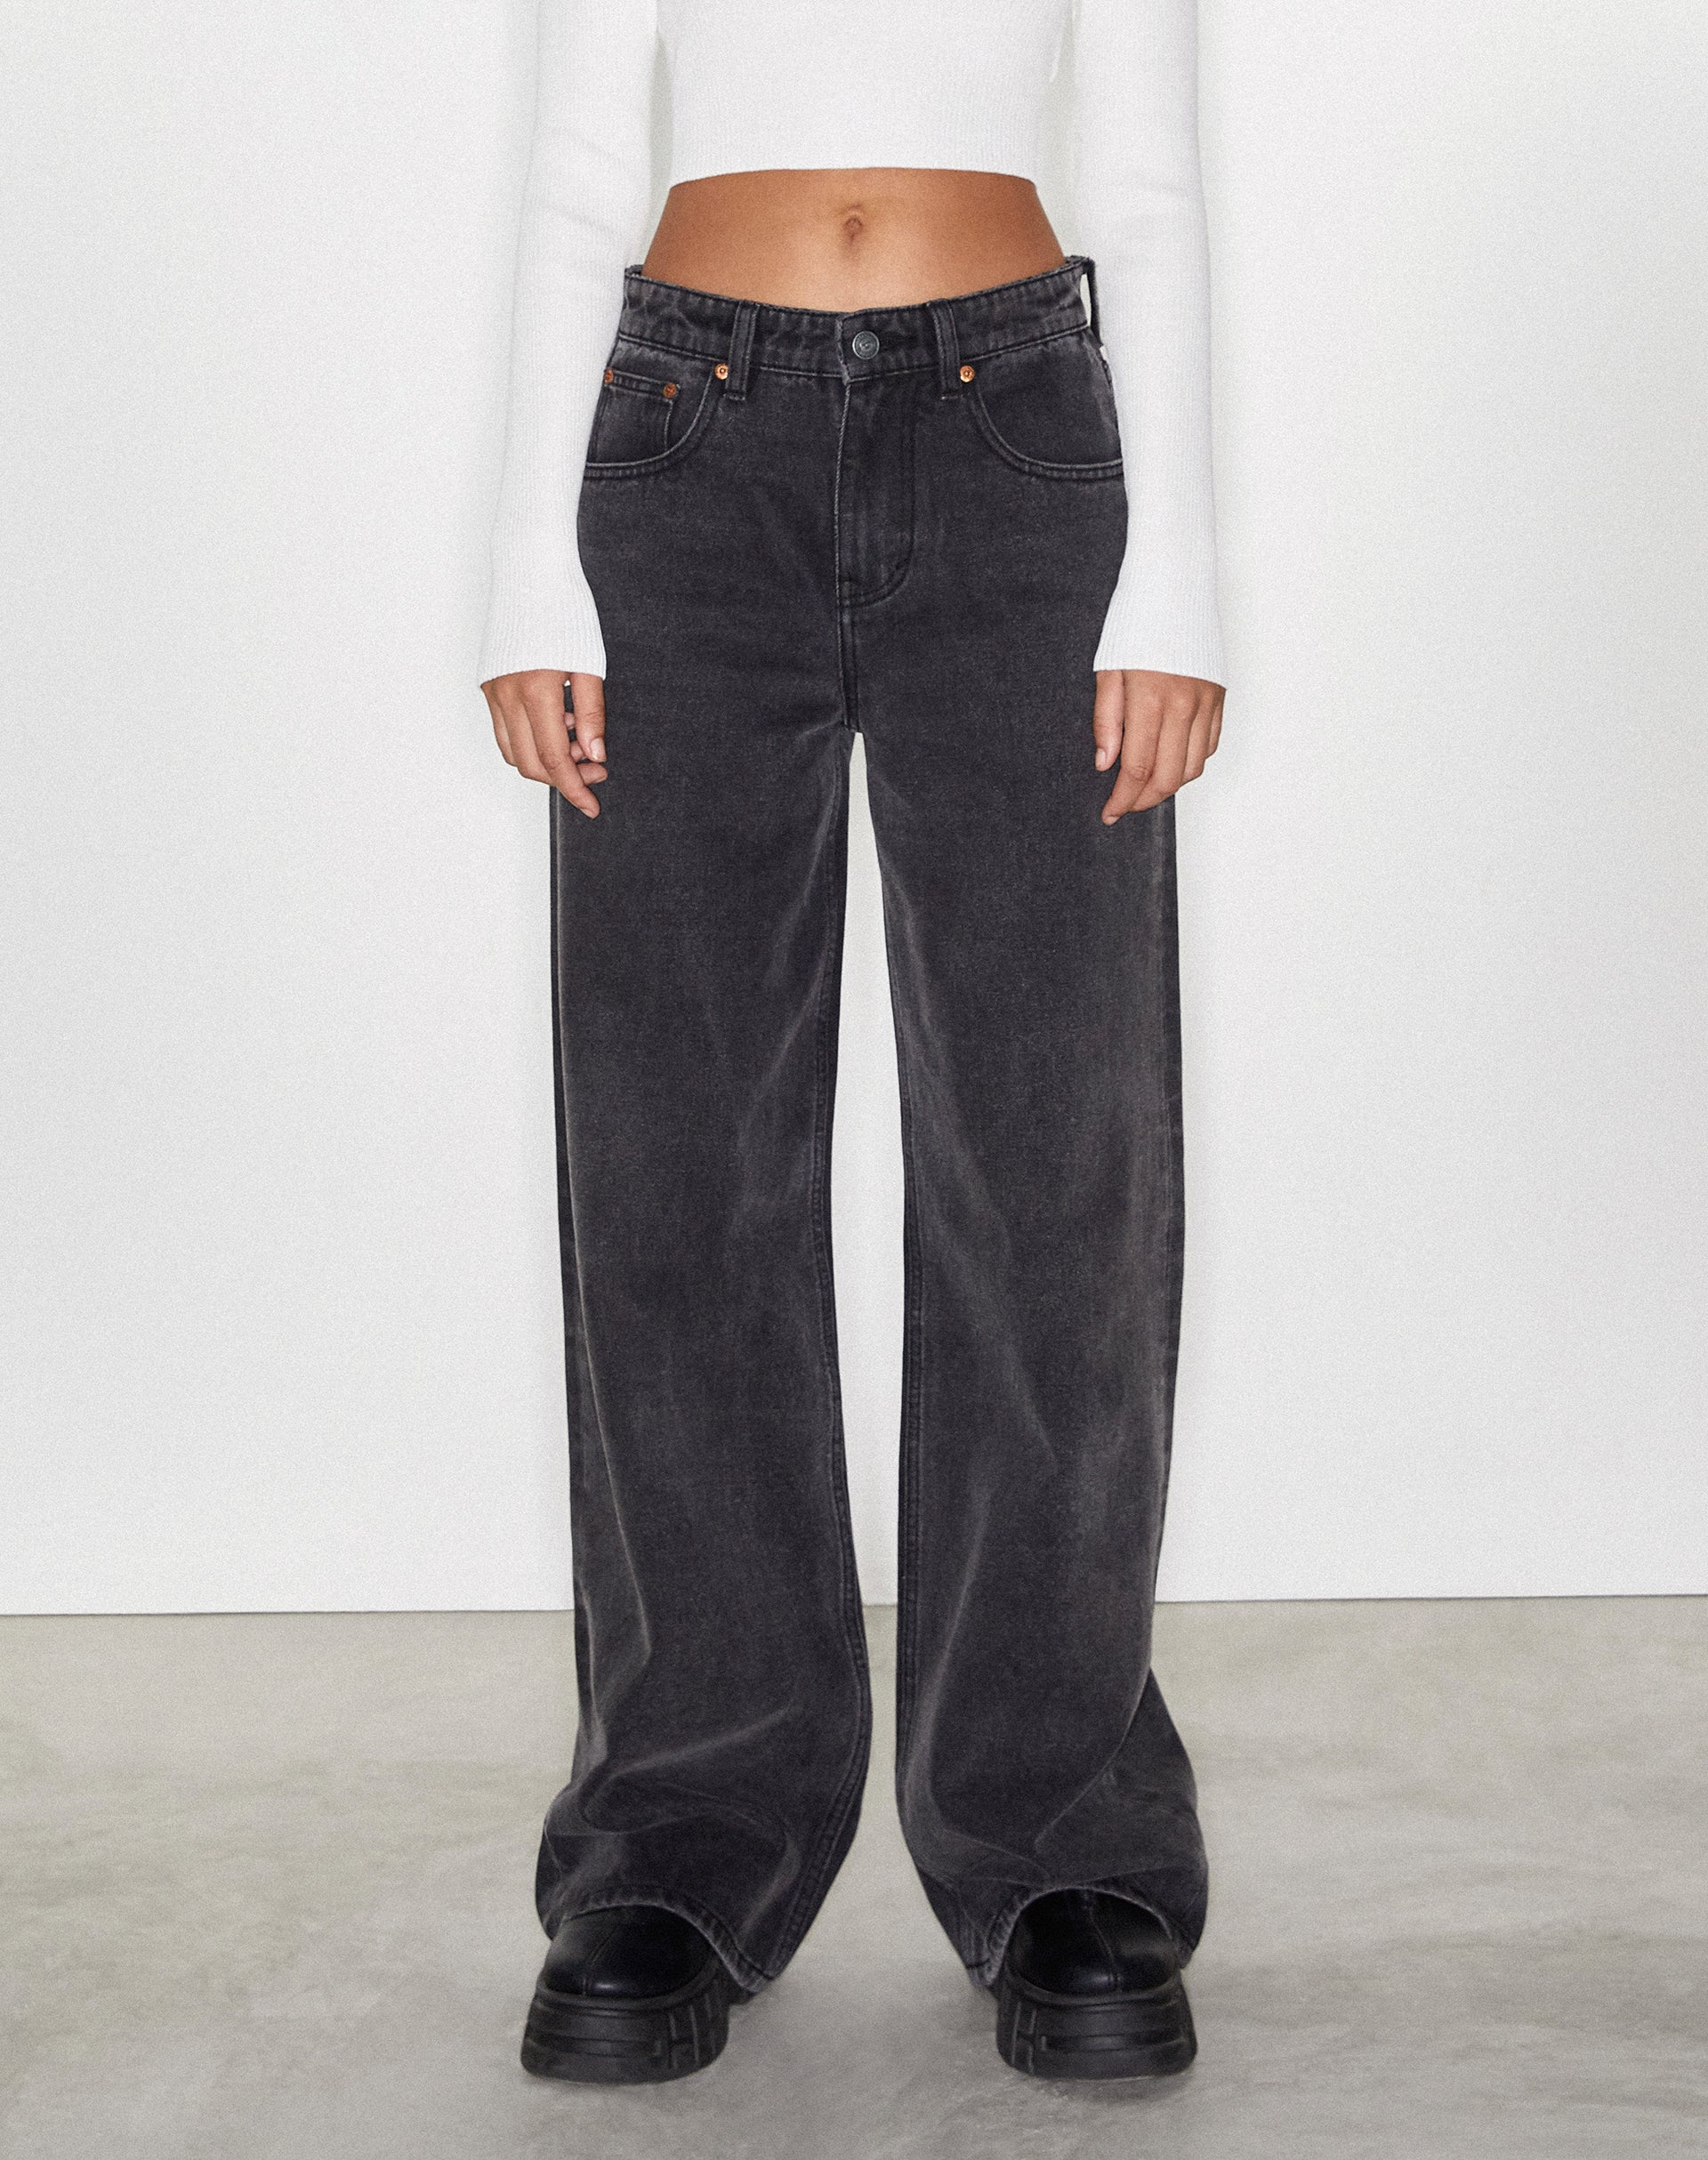 Roomy Extra Wide Low Rise Jeans in Black Wash